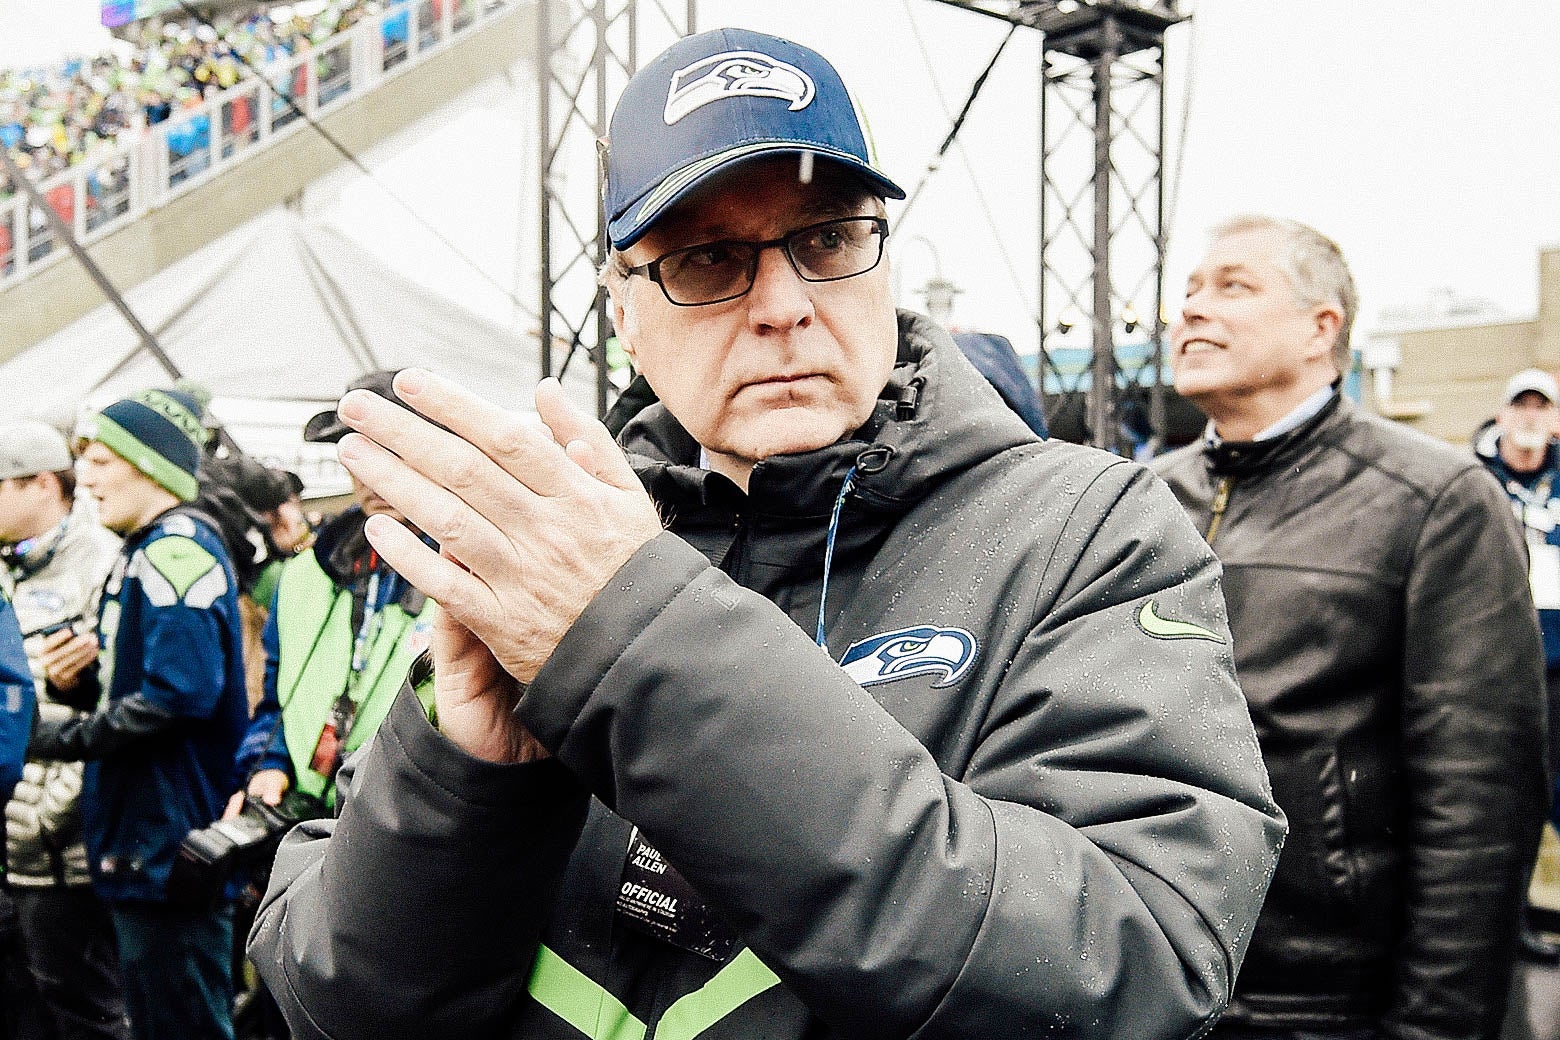 Paul Allen claps at a Seahawks game.